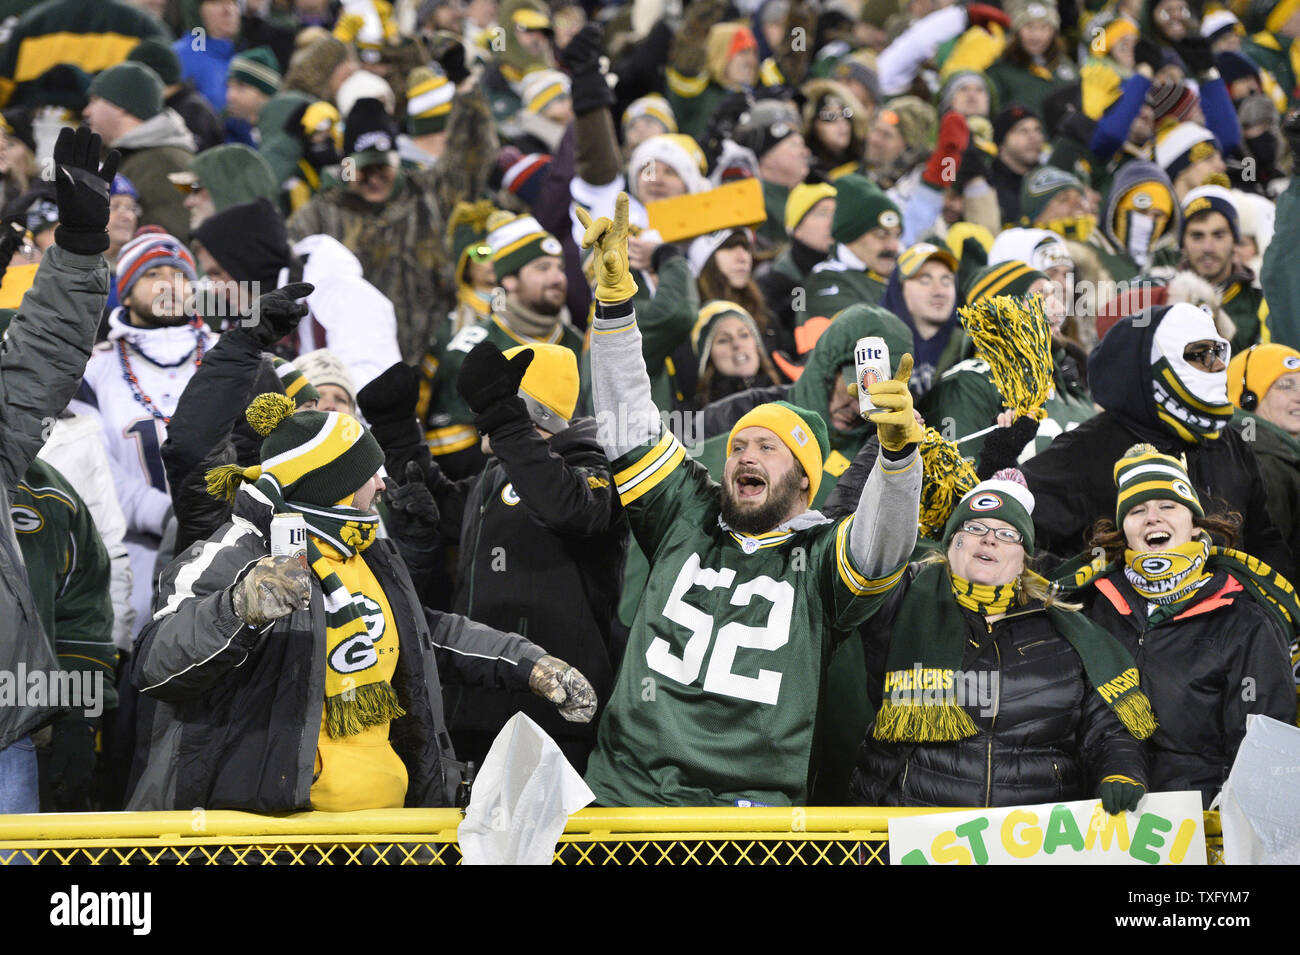 Green Bay Packers fans celebrate after the Packers got a first down with two minutes left in the fourth quarter to ice the game against the New England Patriots at Lambeau Field on November 30, 2014 in Green Bay, Wisconsin. The Packers defeated the Patriots 26-21.     UPI/Brian Kersey Stock Photo